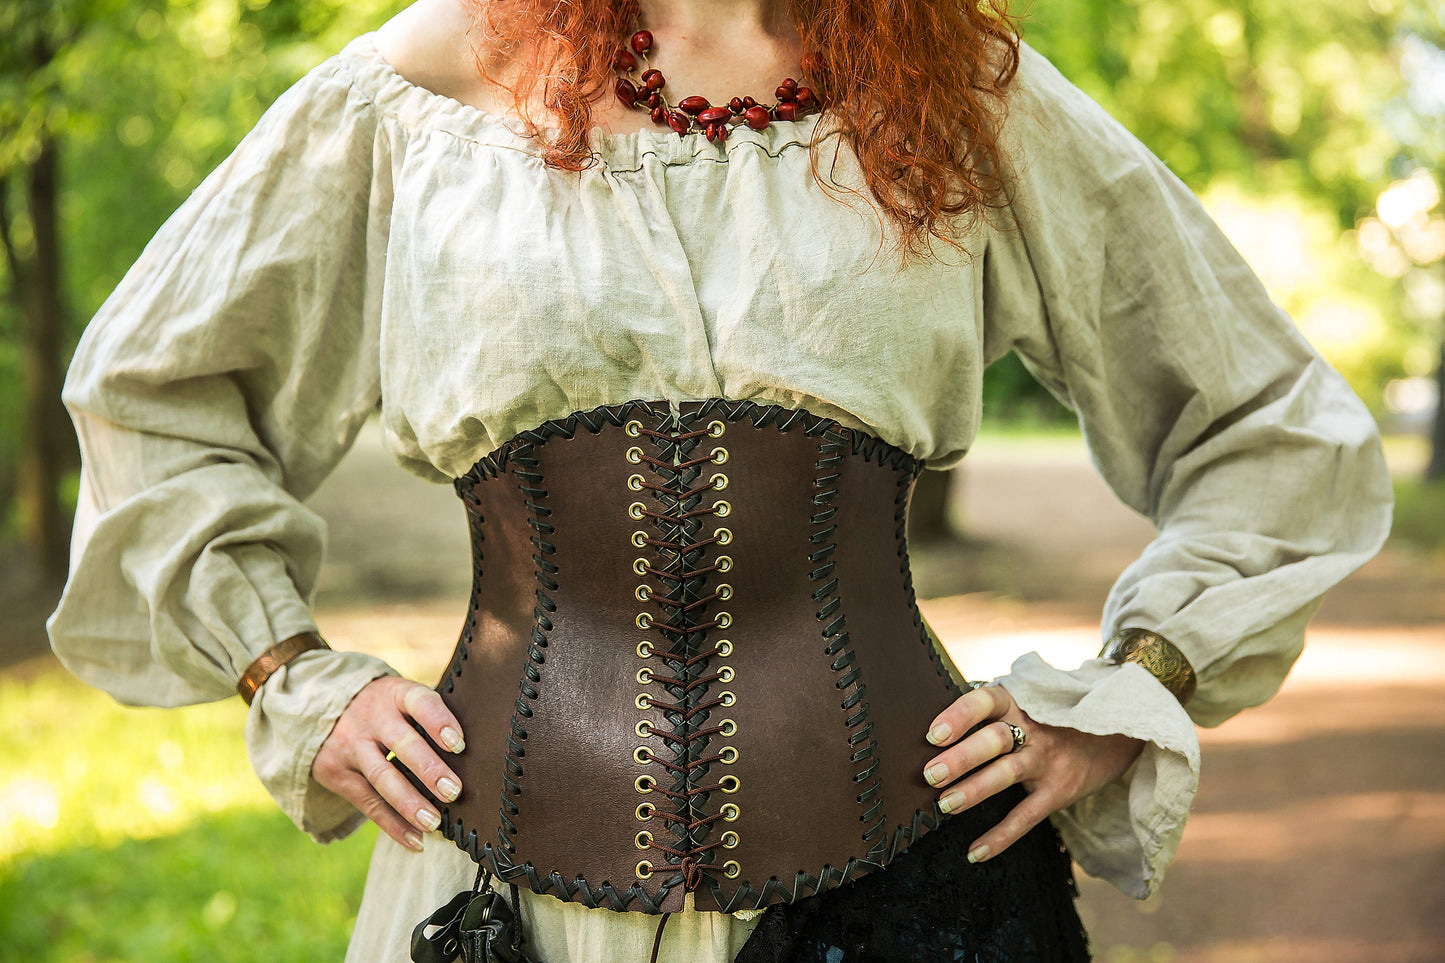 Broad Belt  Leather corset belt, Leather corset, Renaissance outfit